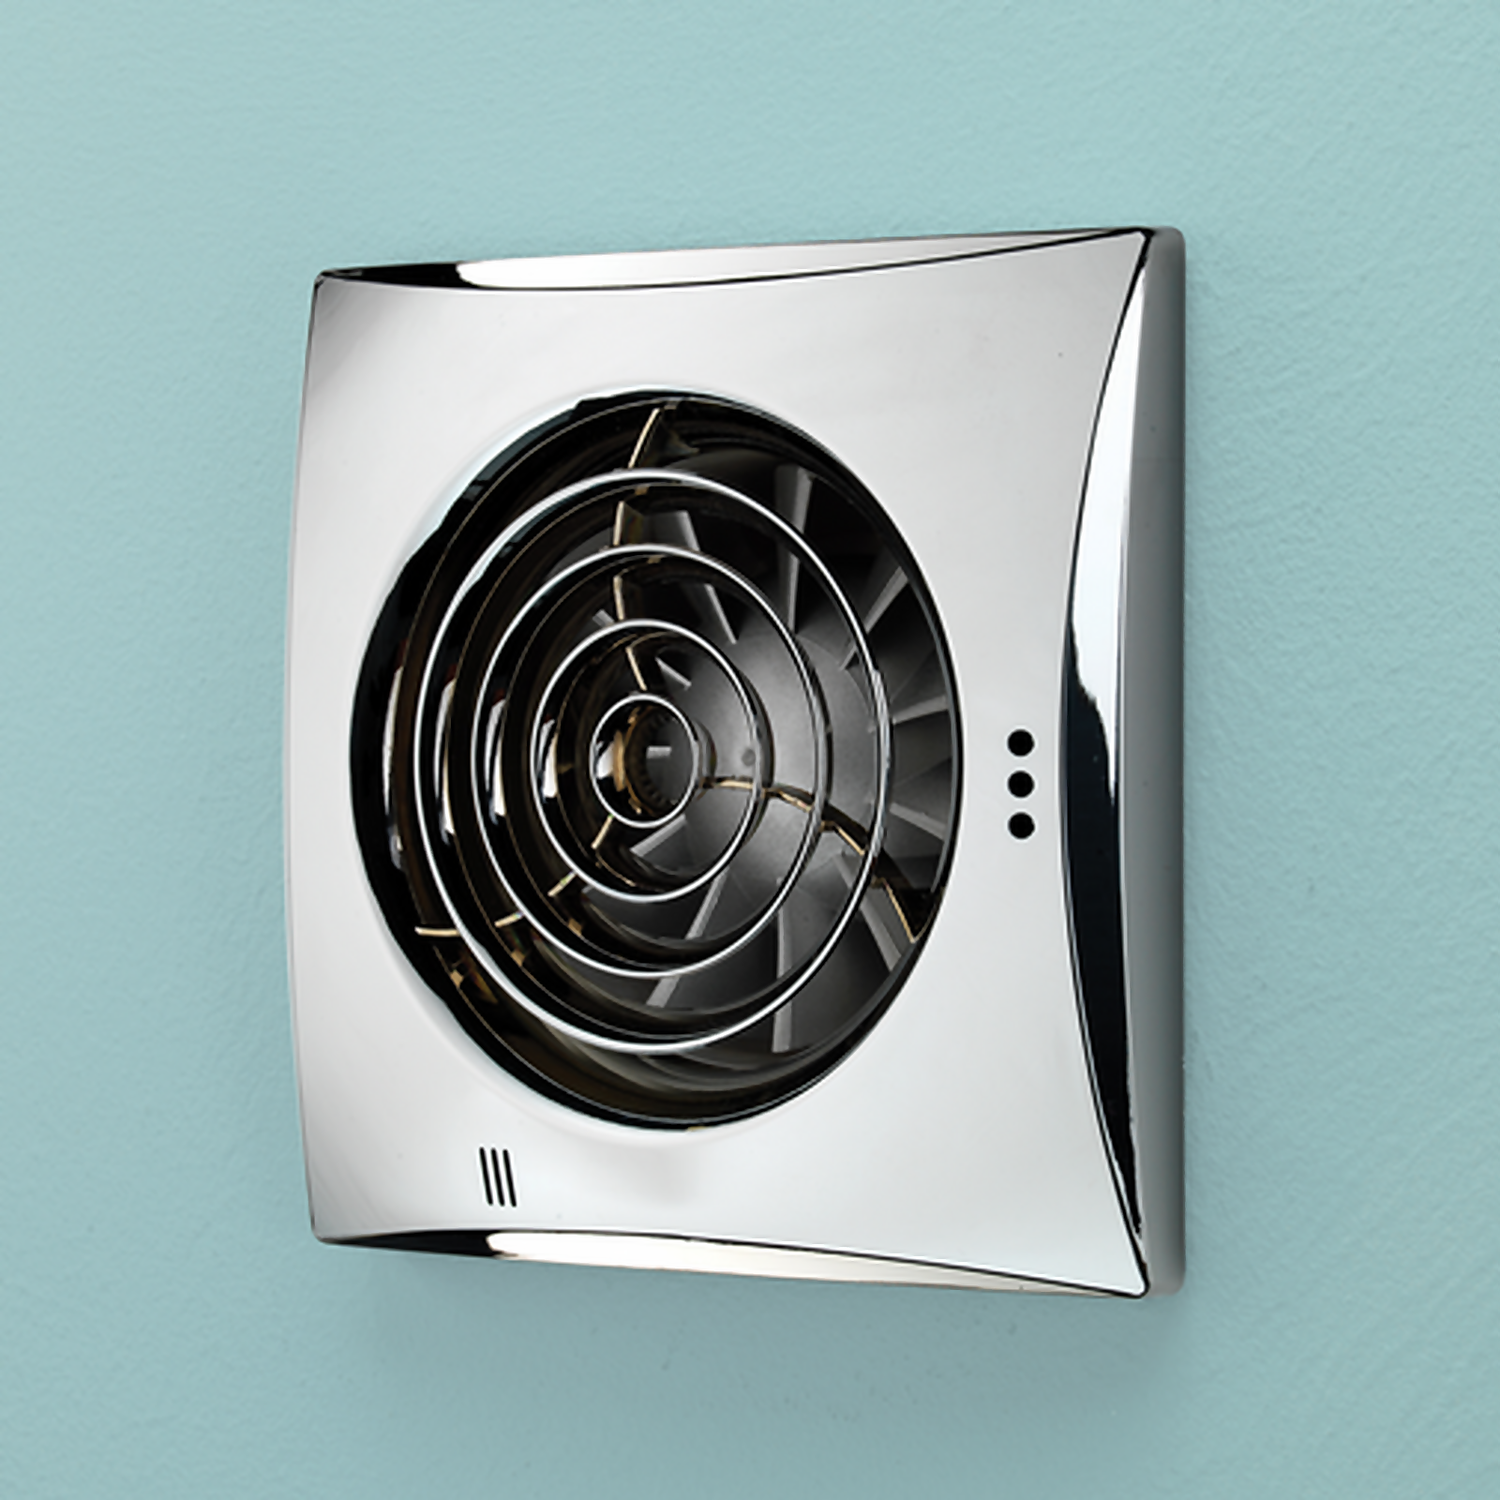 Whisper Wall Mounted Bathroom Extractor Fan - Chrome